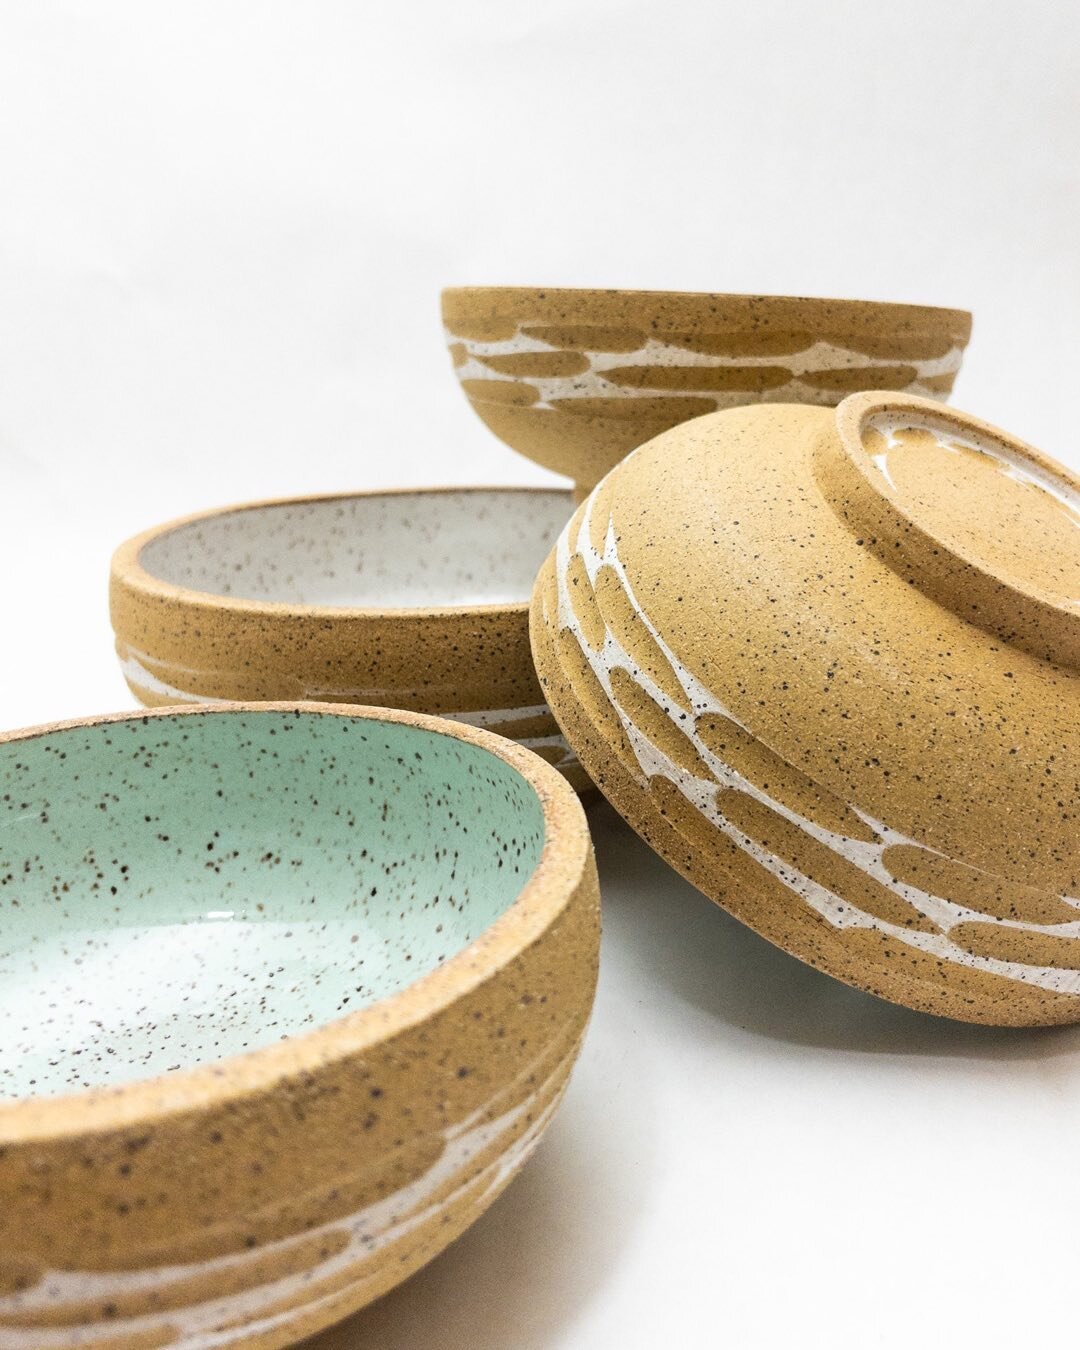 These bowls, in different sizes and colors, are on their way to the new home in New York.
Thank you R. and J.